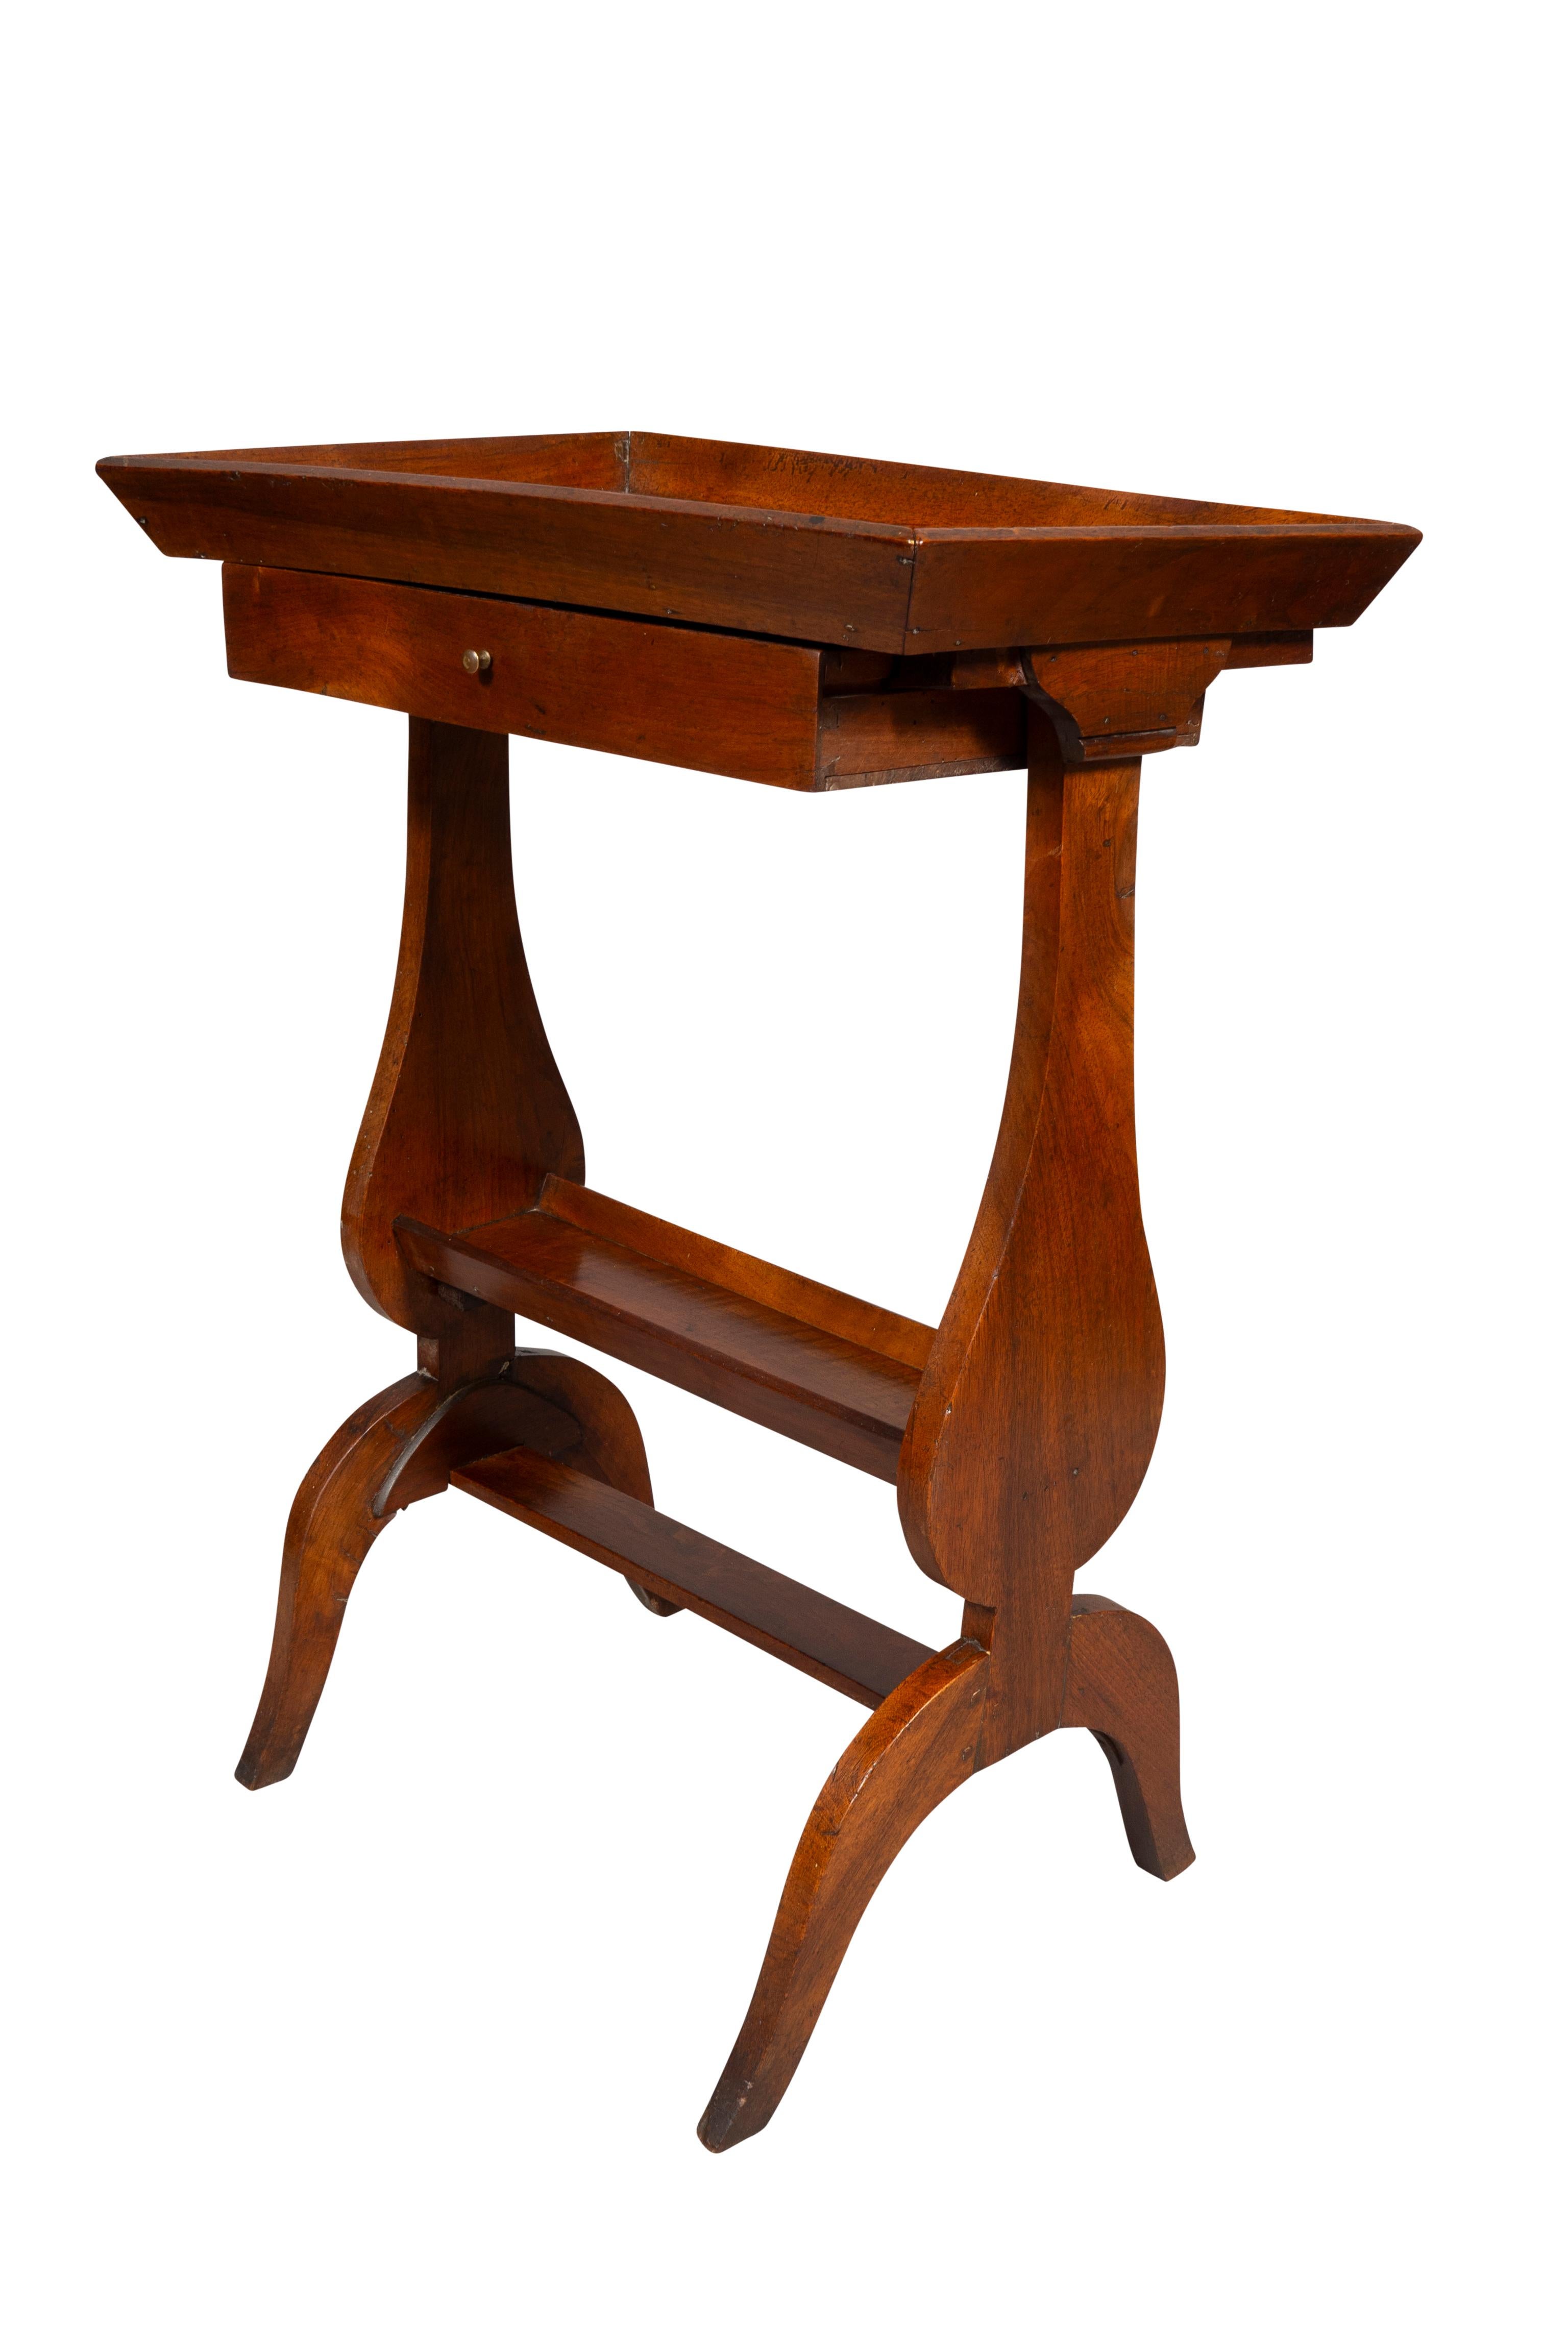 19th Century Directoire Walnut Tricoteuse Table For Sale